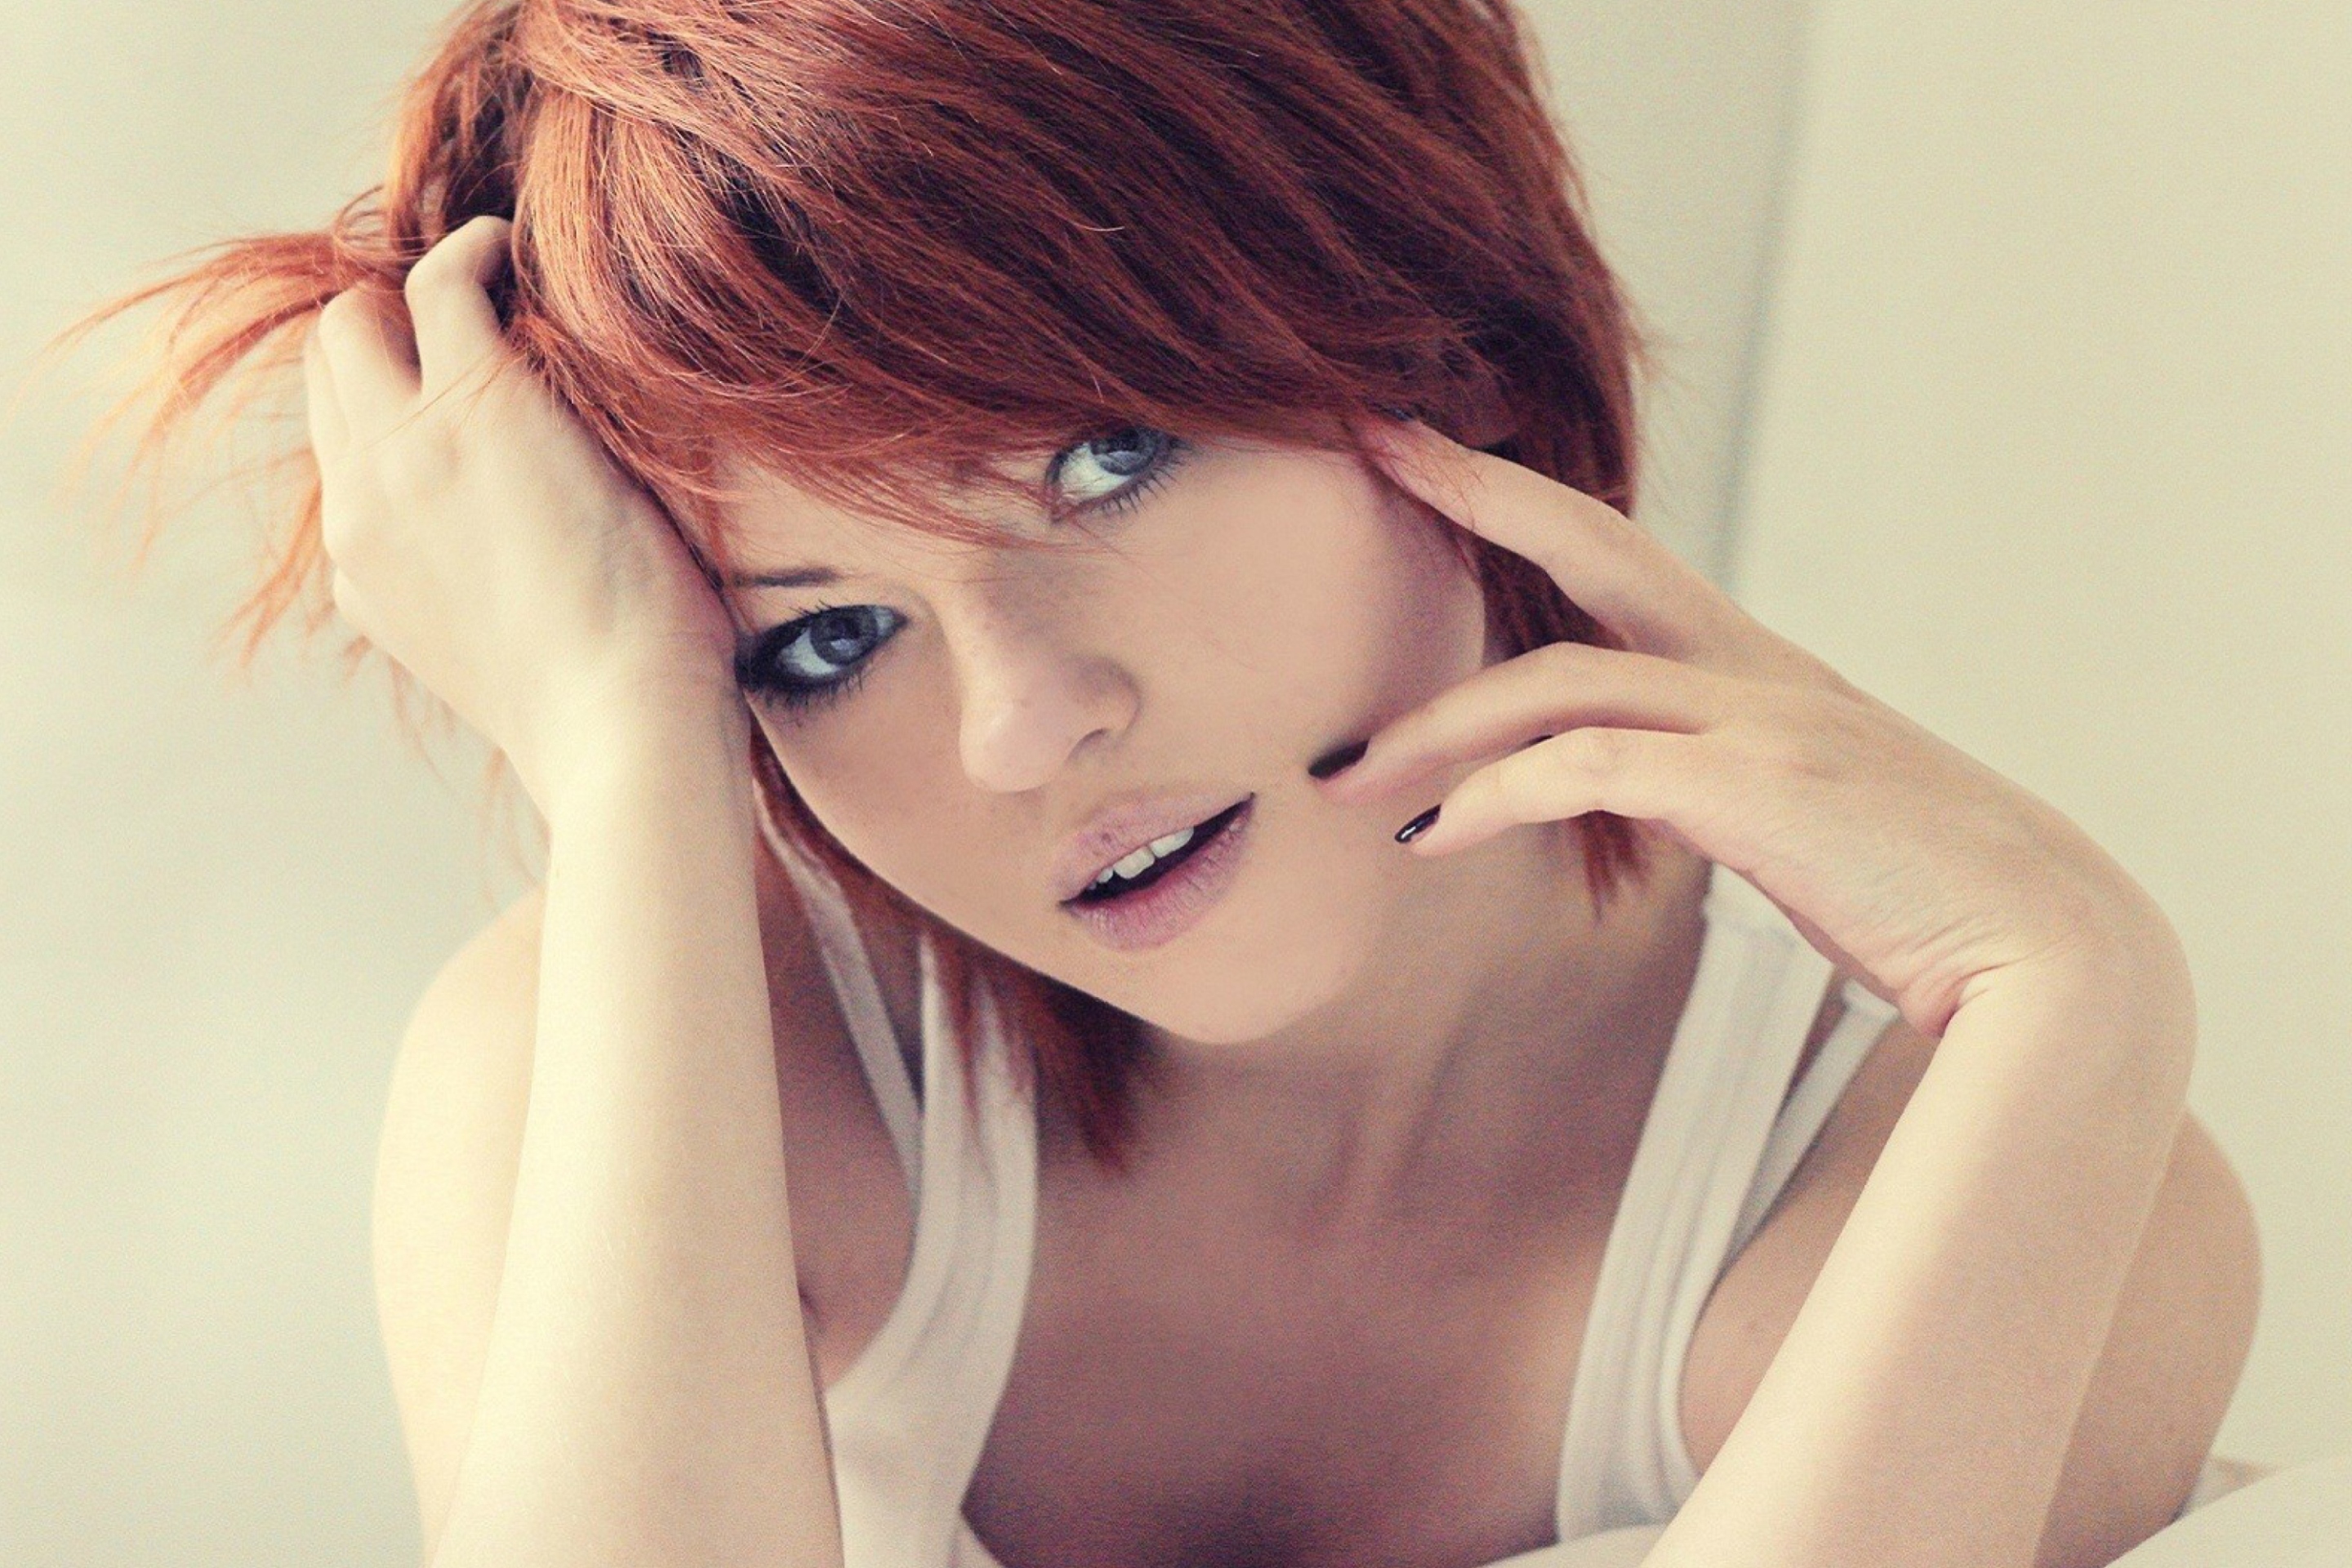 Redhead In White Top wallpaper 2880x1920